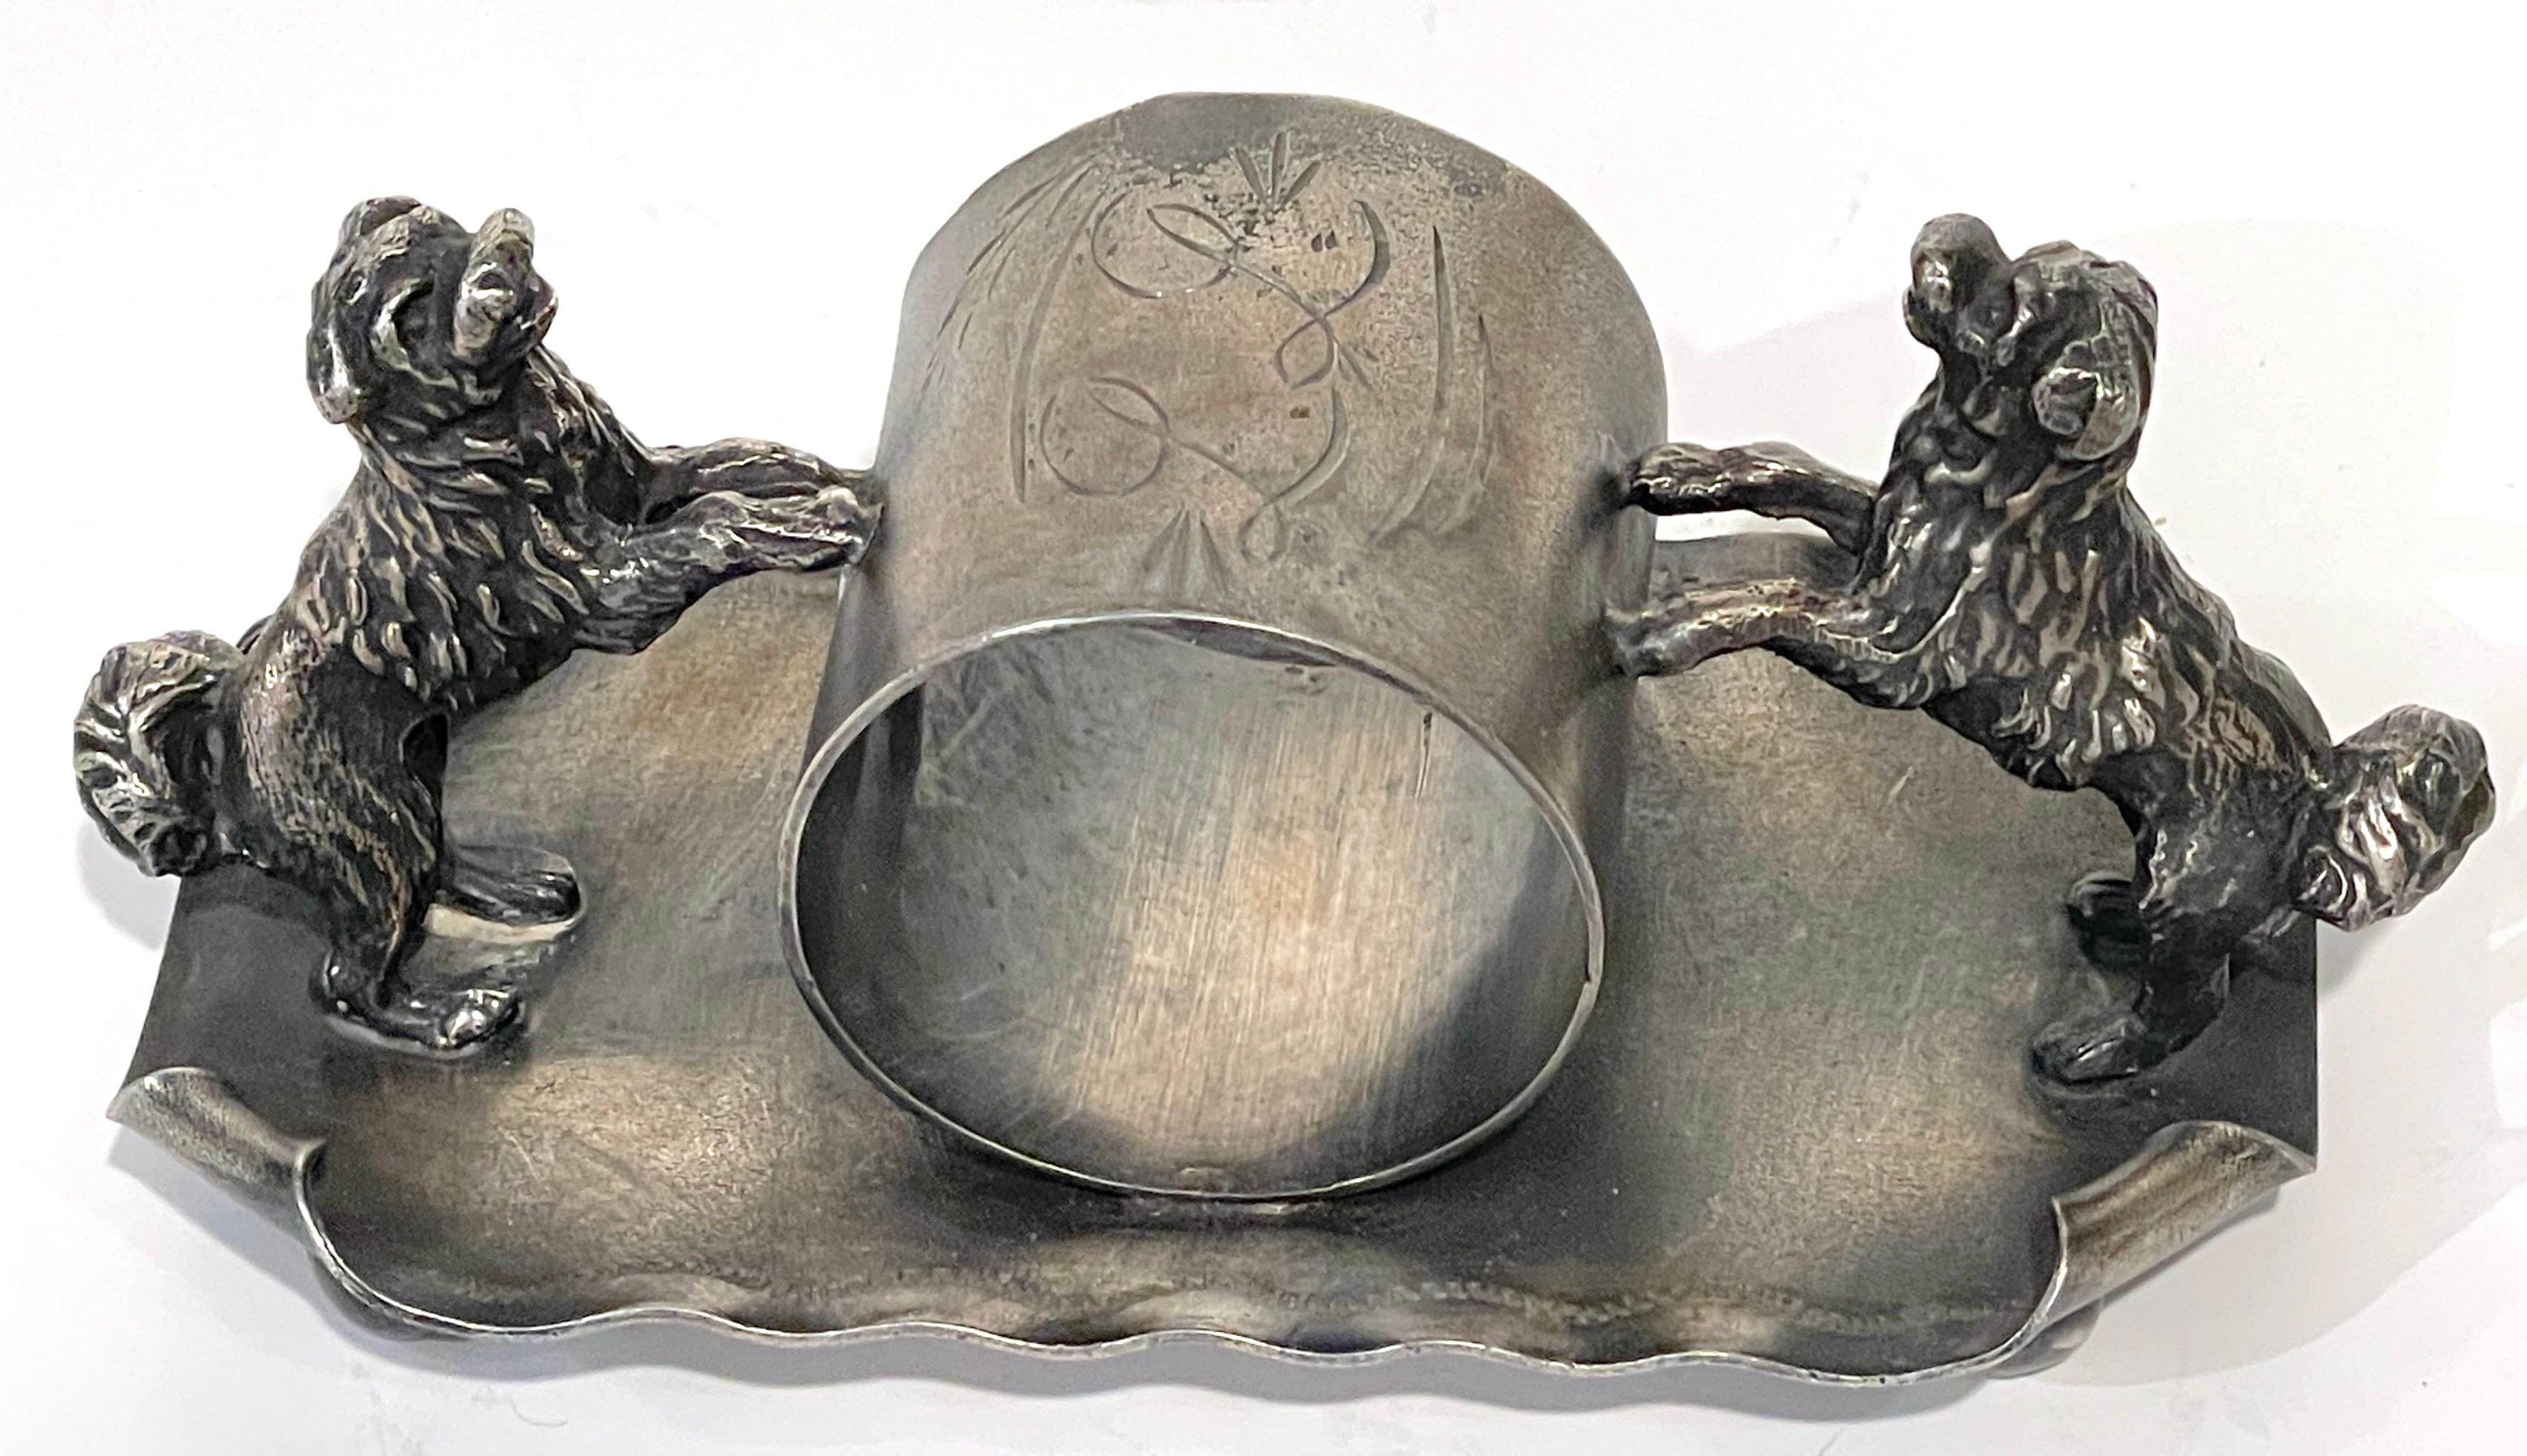 American Victorian 'Double Dog' Silverplated Figural Napkin Ring, Circa 1890 

An impressive American Victorian 'Double Dog' silverplated figural napkin ring circa 1890. This substantial piece, measuring 5.5 inches wide, 2.5 inches deep, and 2.5